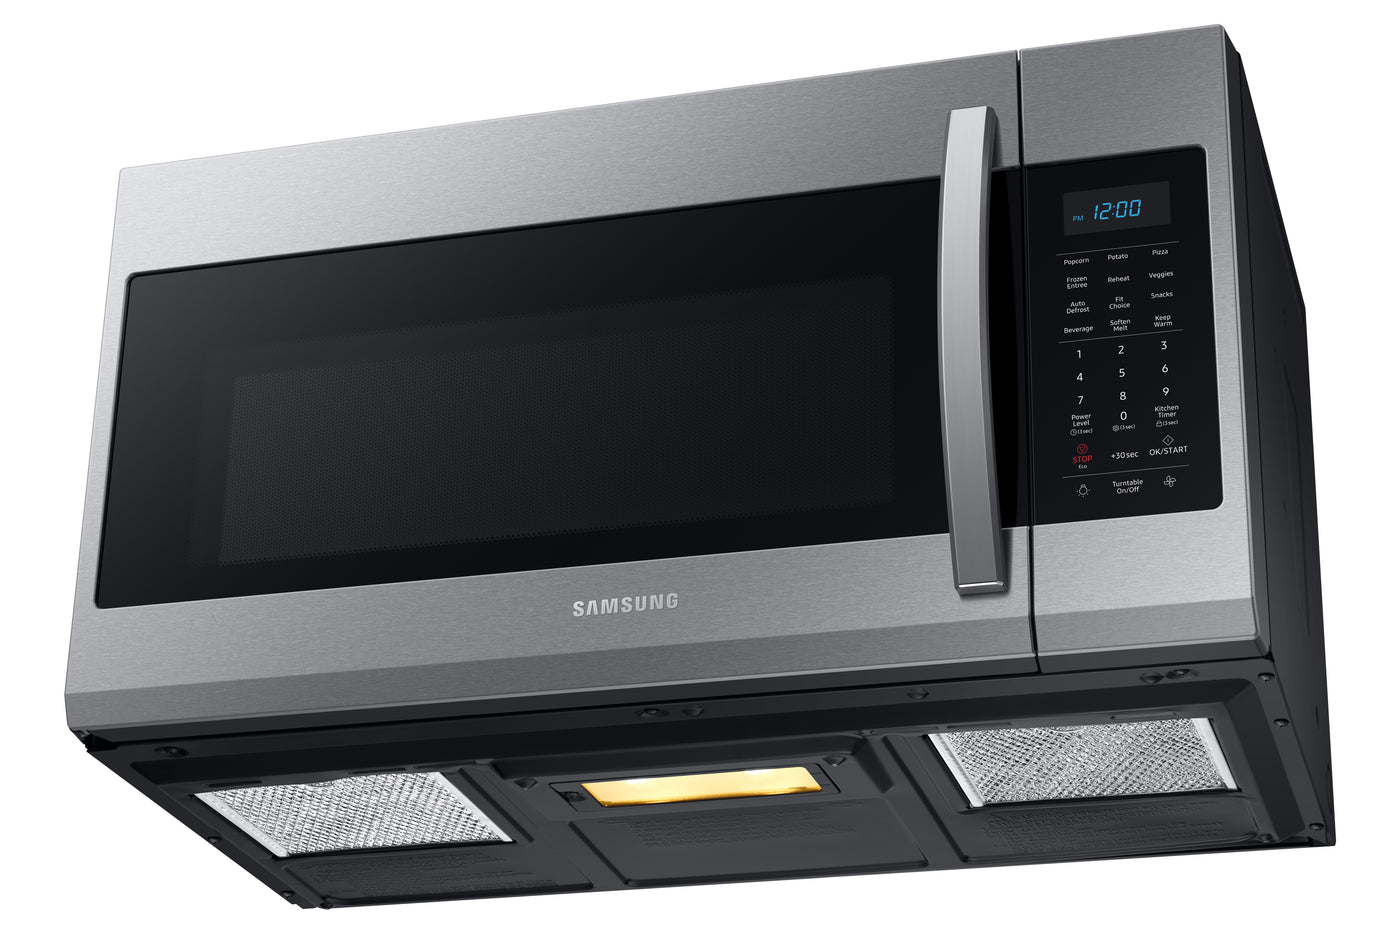 Samsung Stainless Steel Over-the-Range Microwave (1.9 Cu. Ft.) - ME19R7041FS